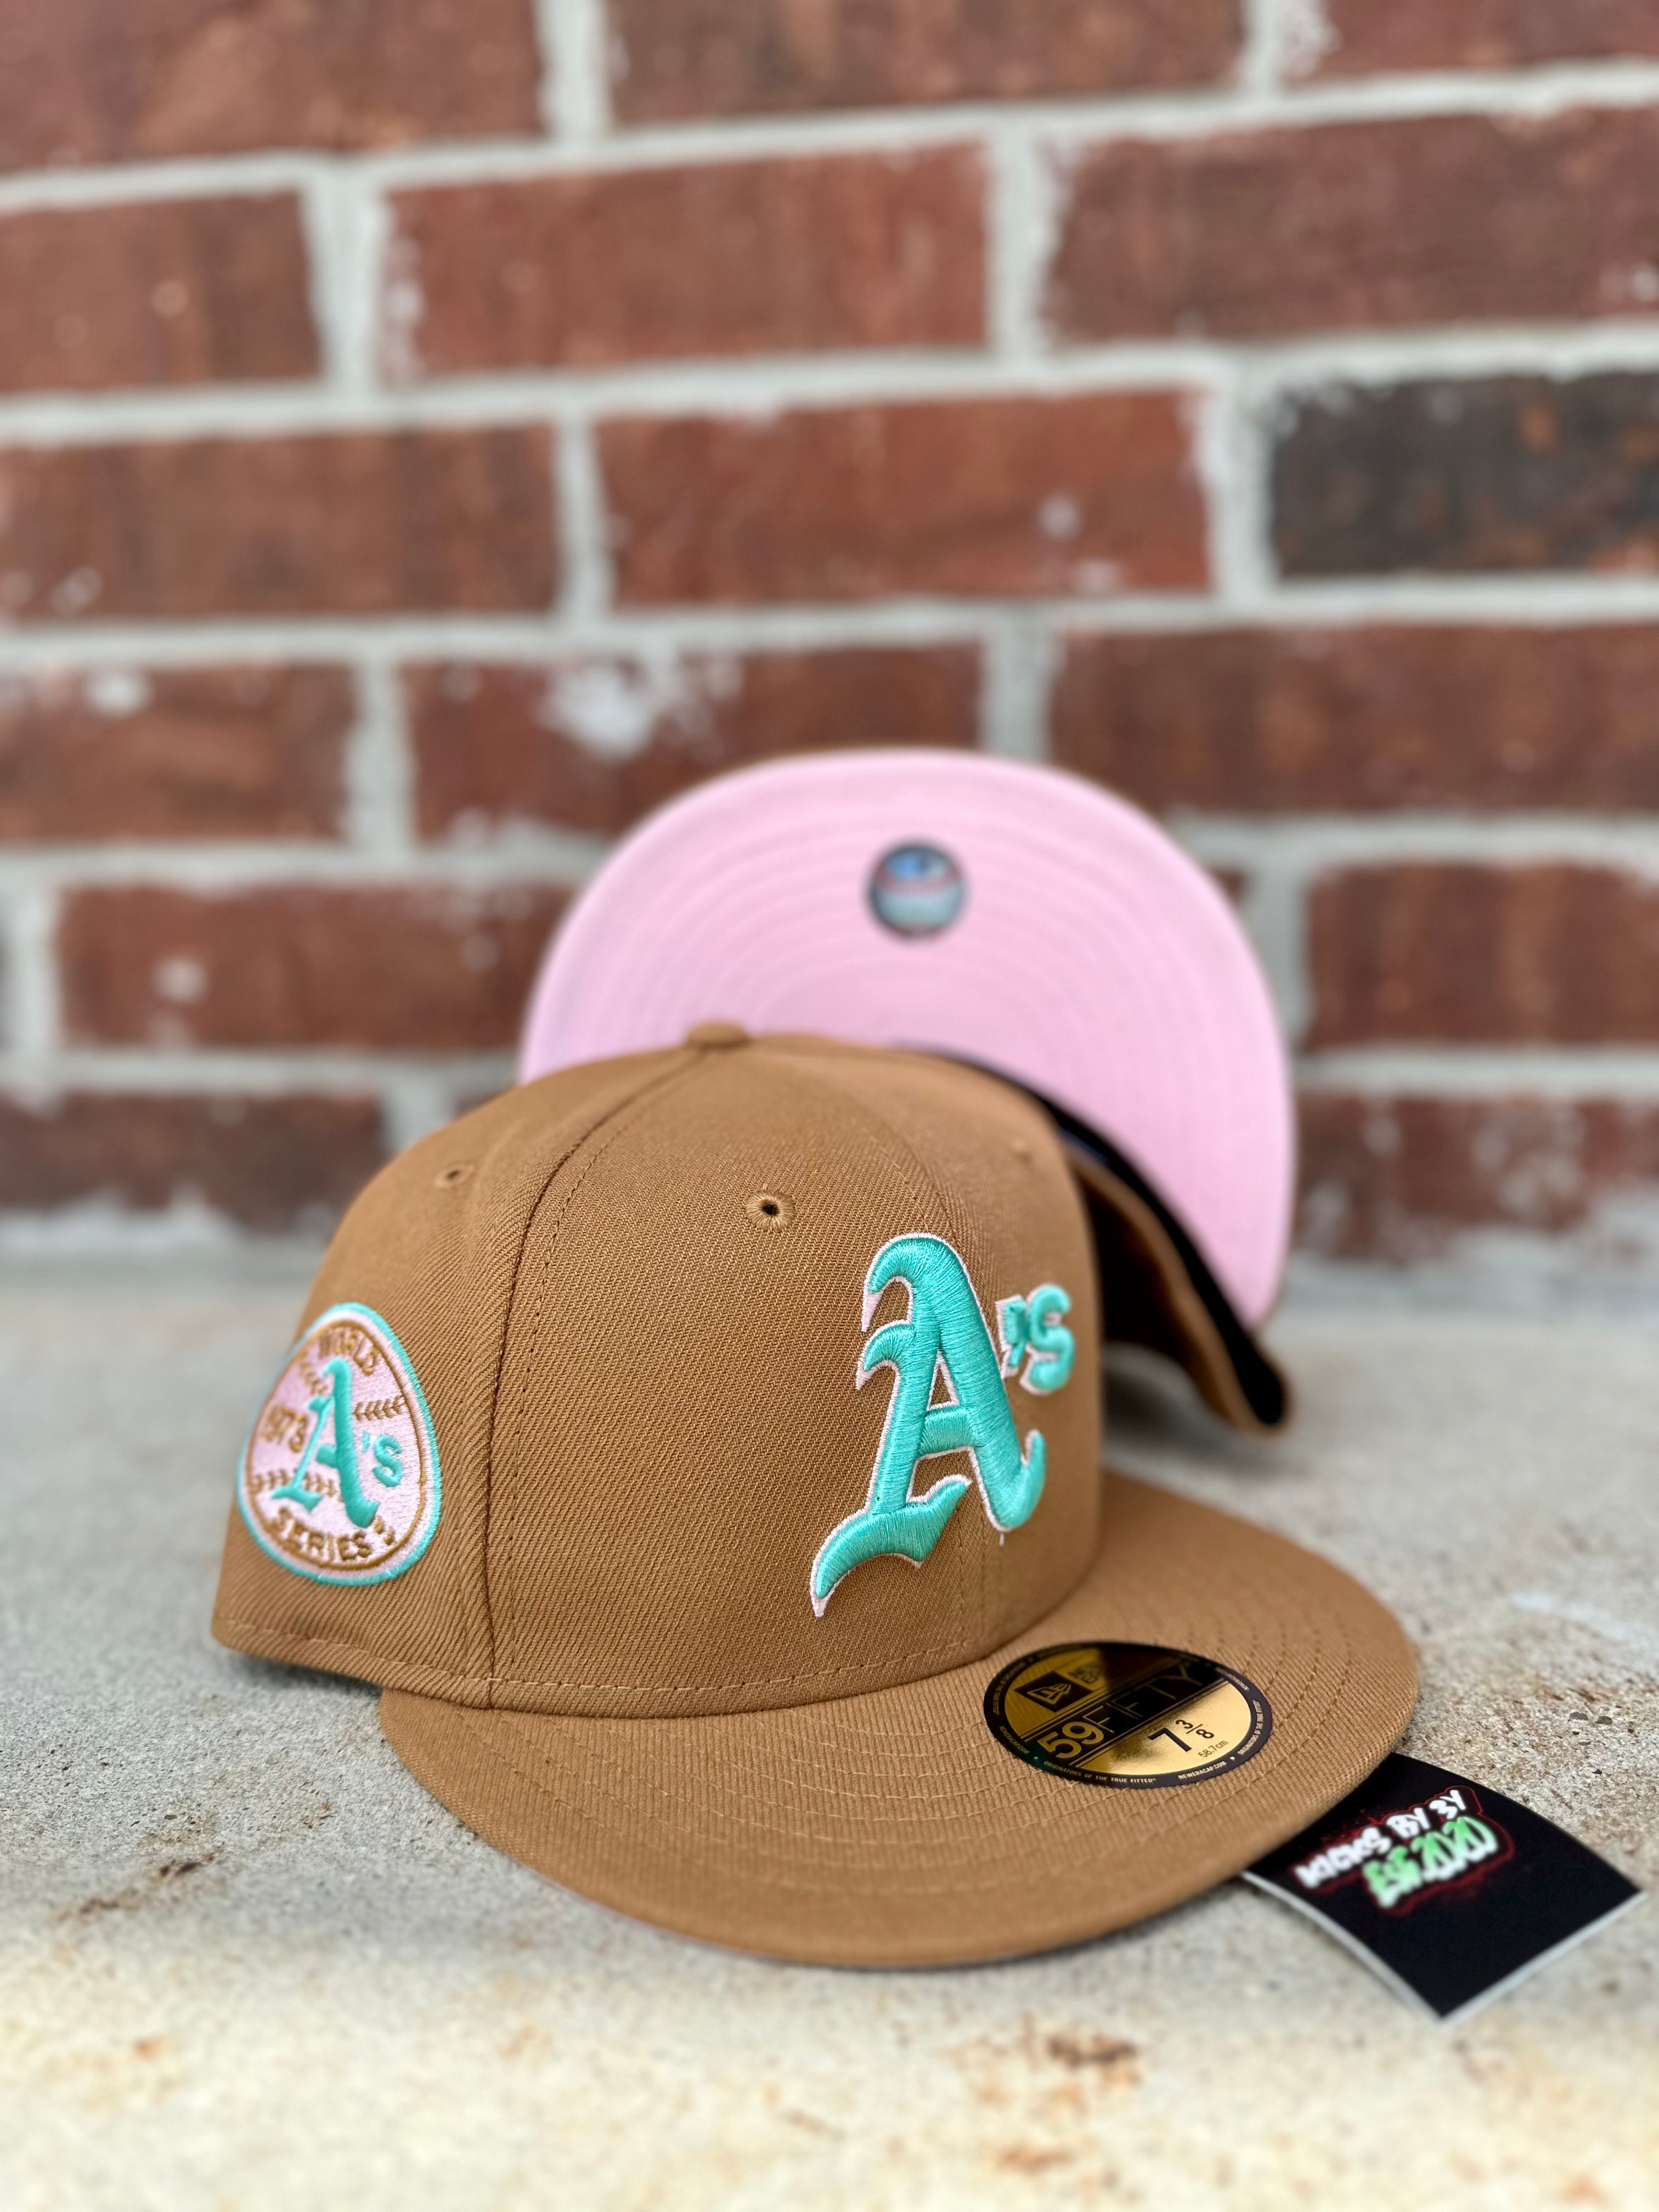 New Era 59 FIFTY Fitted "Oakland Athletics" Brown/Teal 1973 World Series